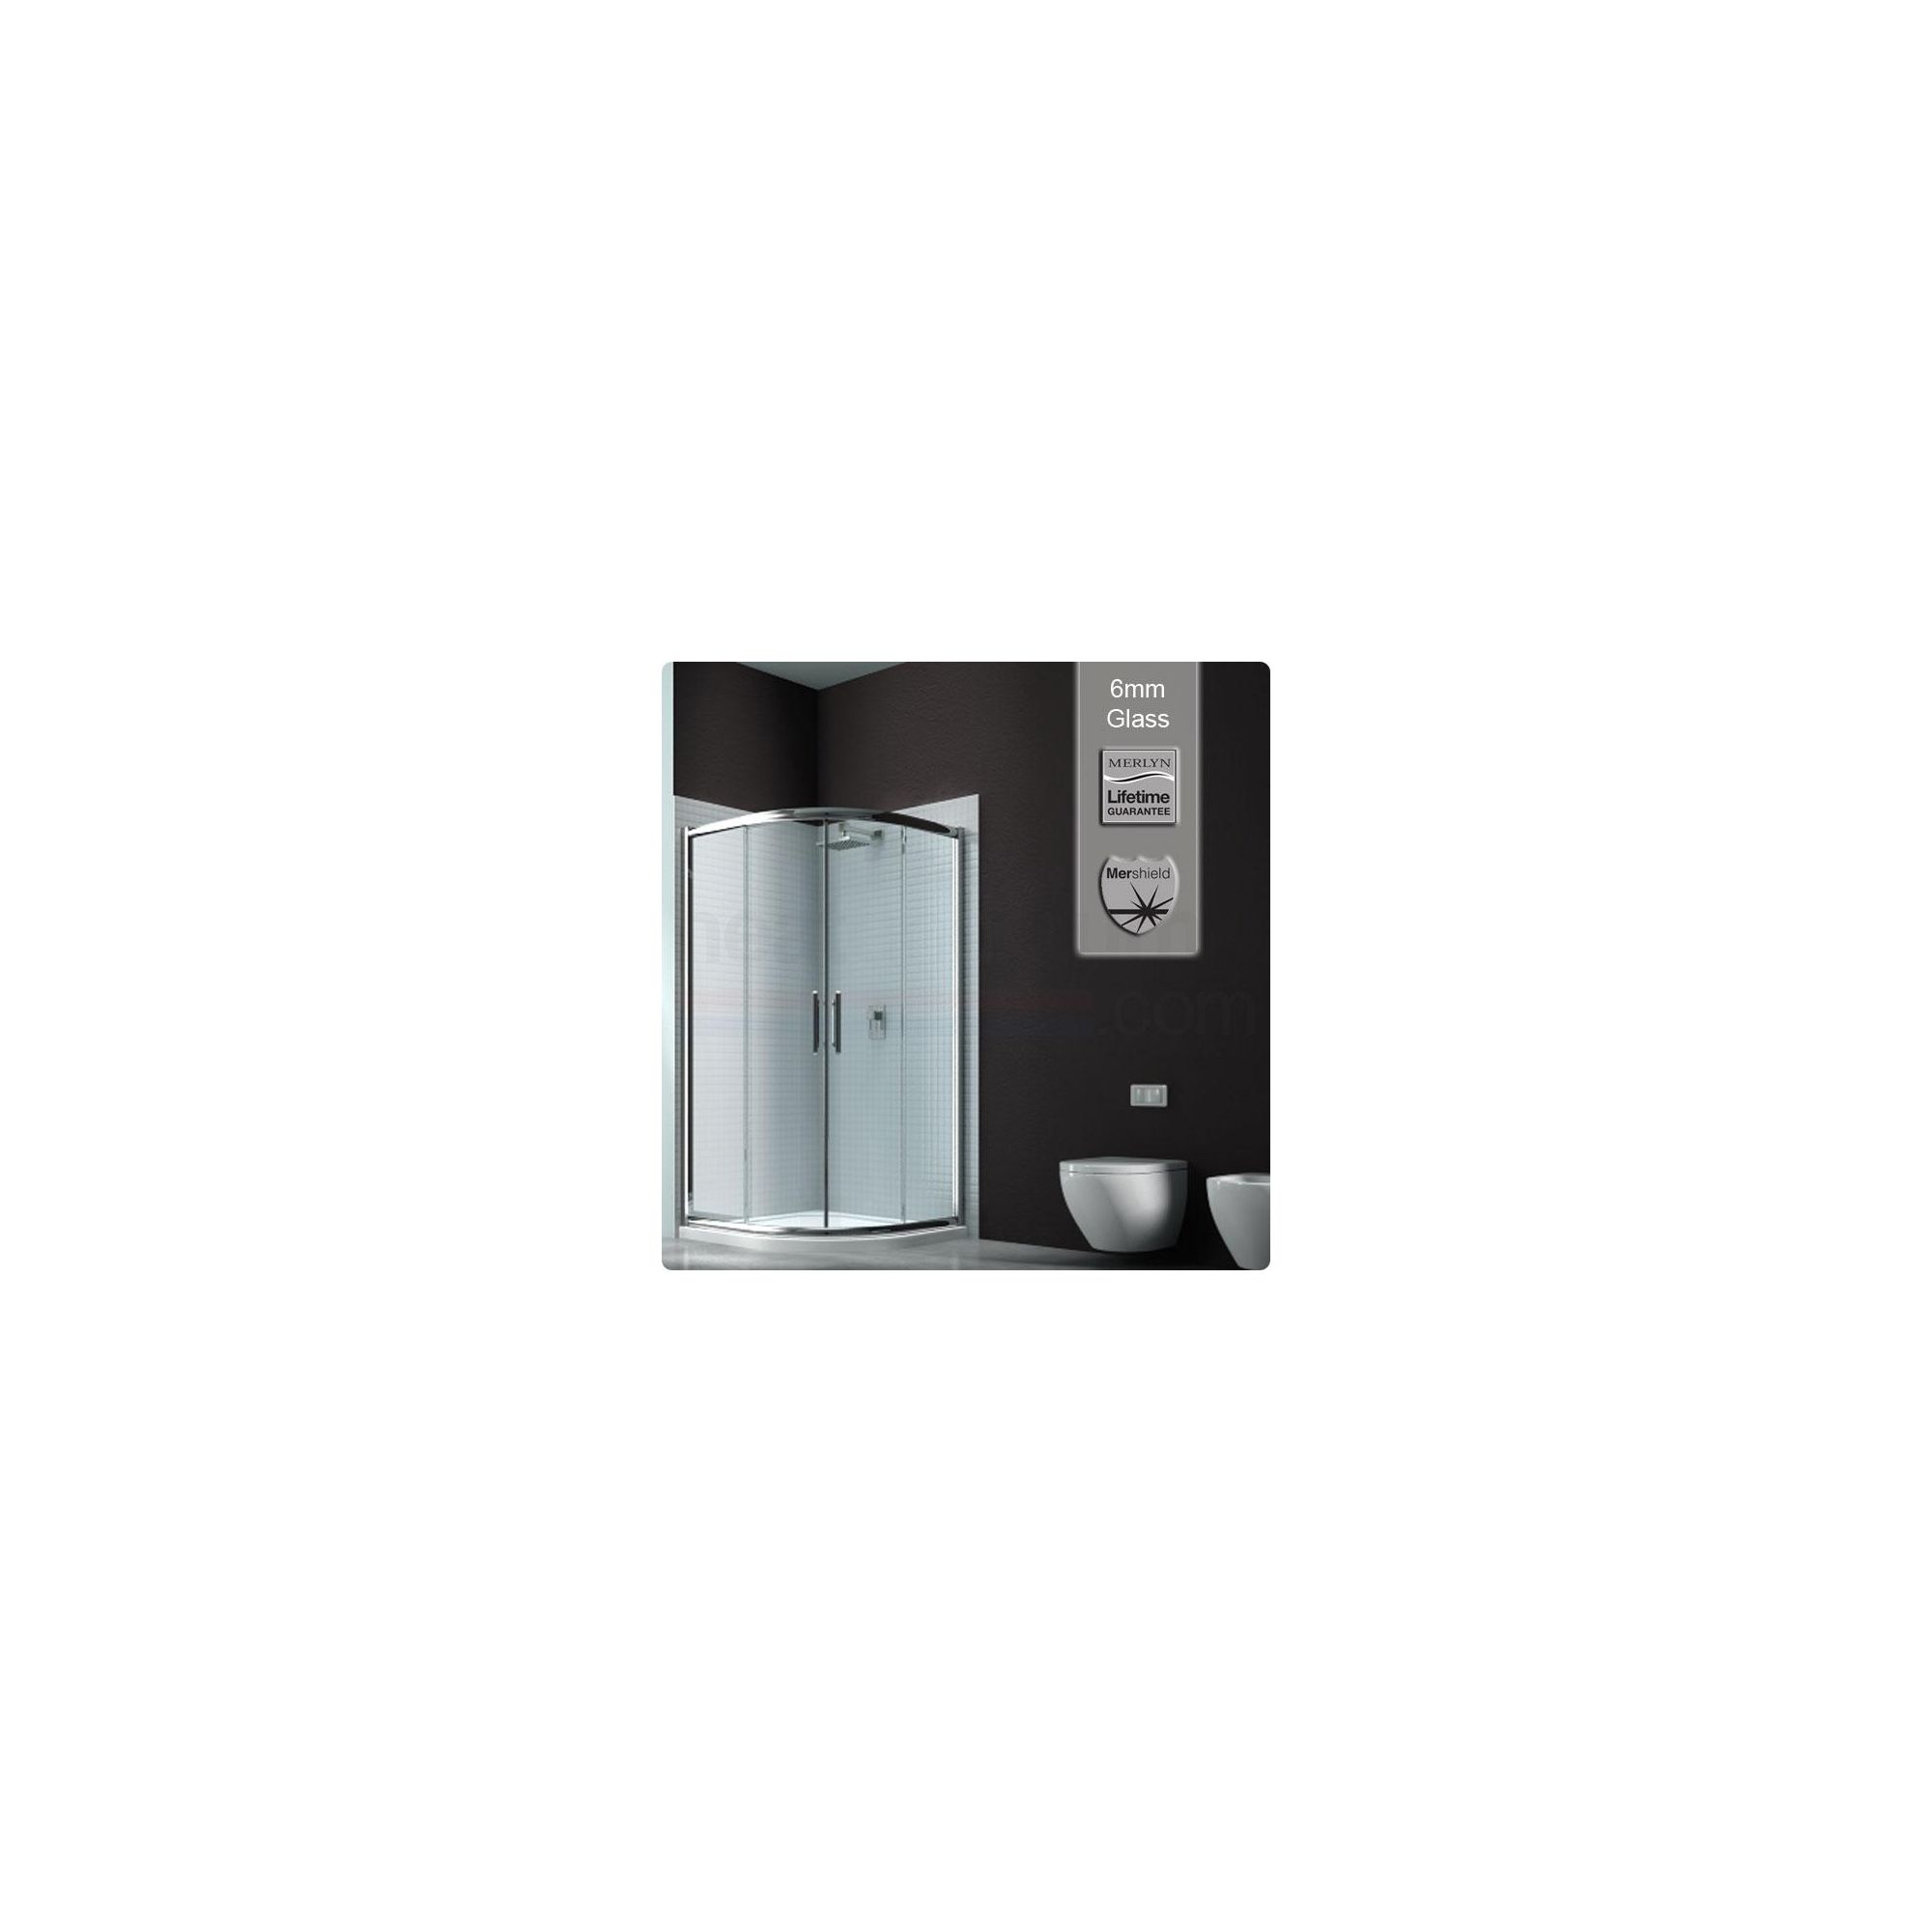 Merlyn Series 6 Sliding 2 Door Quadrant Shower Enclosure, 800mm, Low Profile Tray, 6mm Glass at Tesco Direct